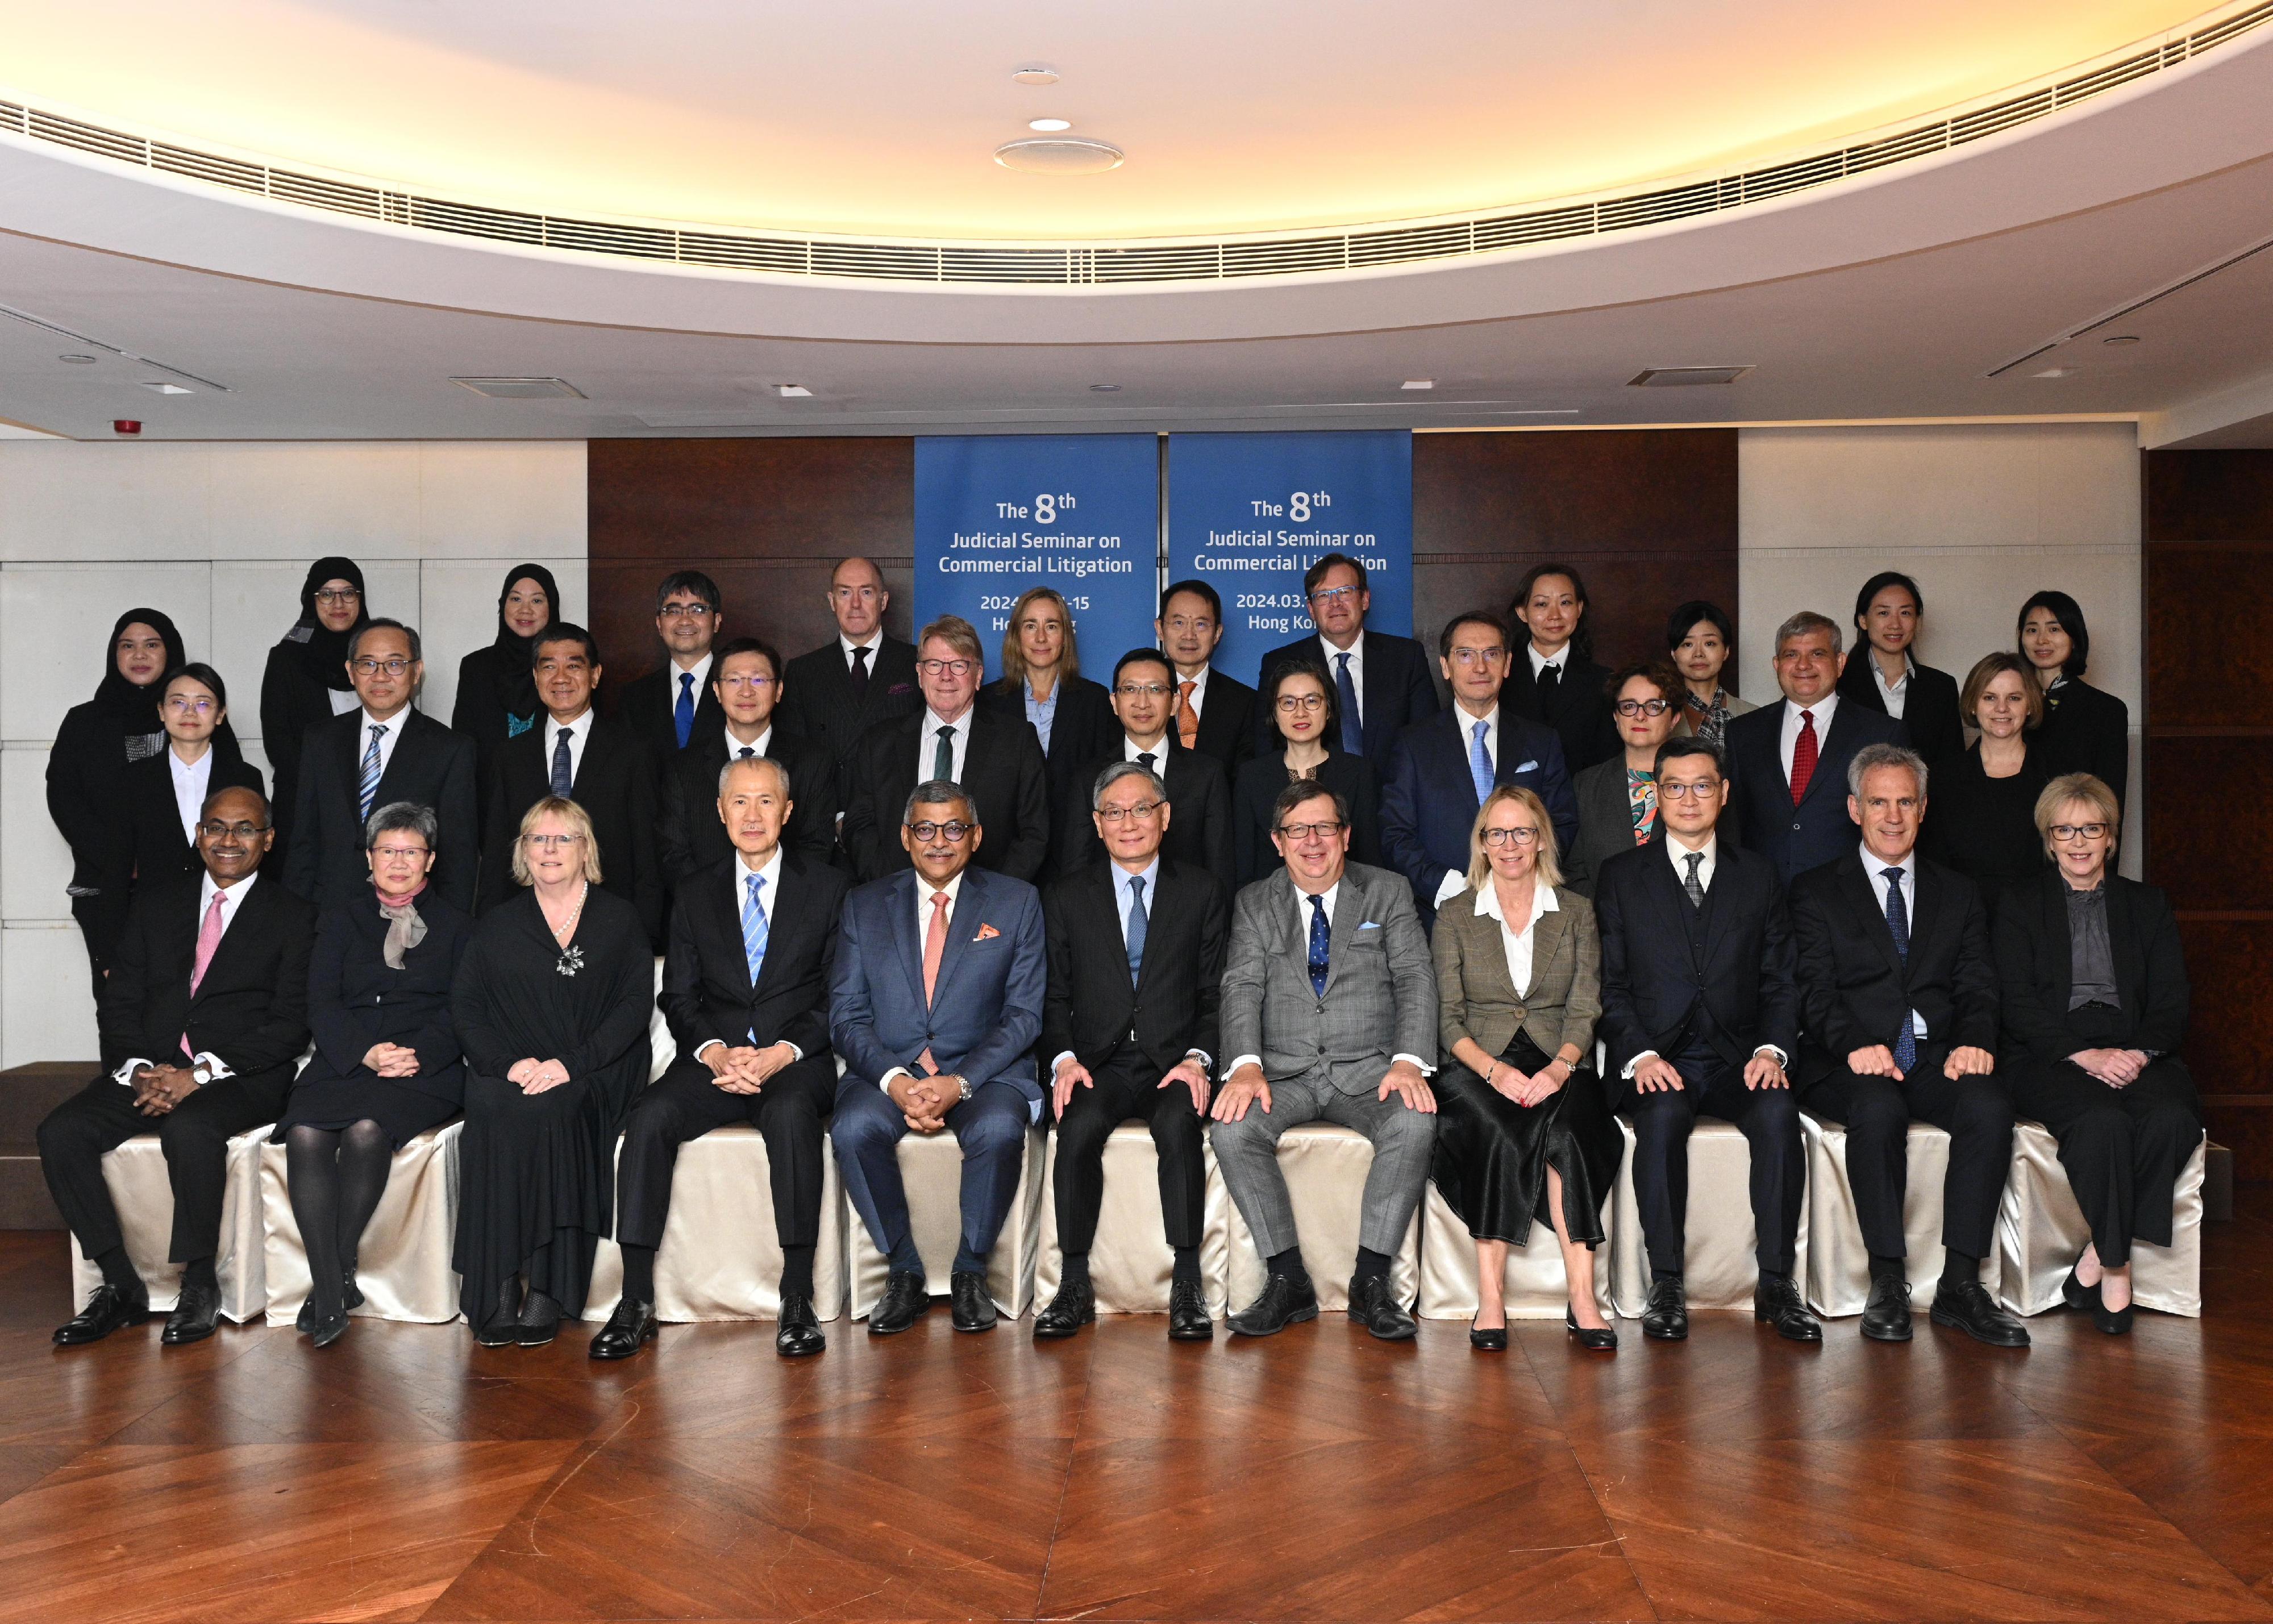 Chief Justice Andrew Cheung Kui-nung, Chief Justice of the Court of Final Appeal of the Hong Kong Special Administrative Region, attended the eighth Judicial Seminar on Commercial Litigation today (March 14). Photo shows Chief Justice Cheung (front row, centre) with senior judges from 10 jurisdictions throughout Asia and the Pacific region at the seminar.